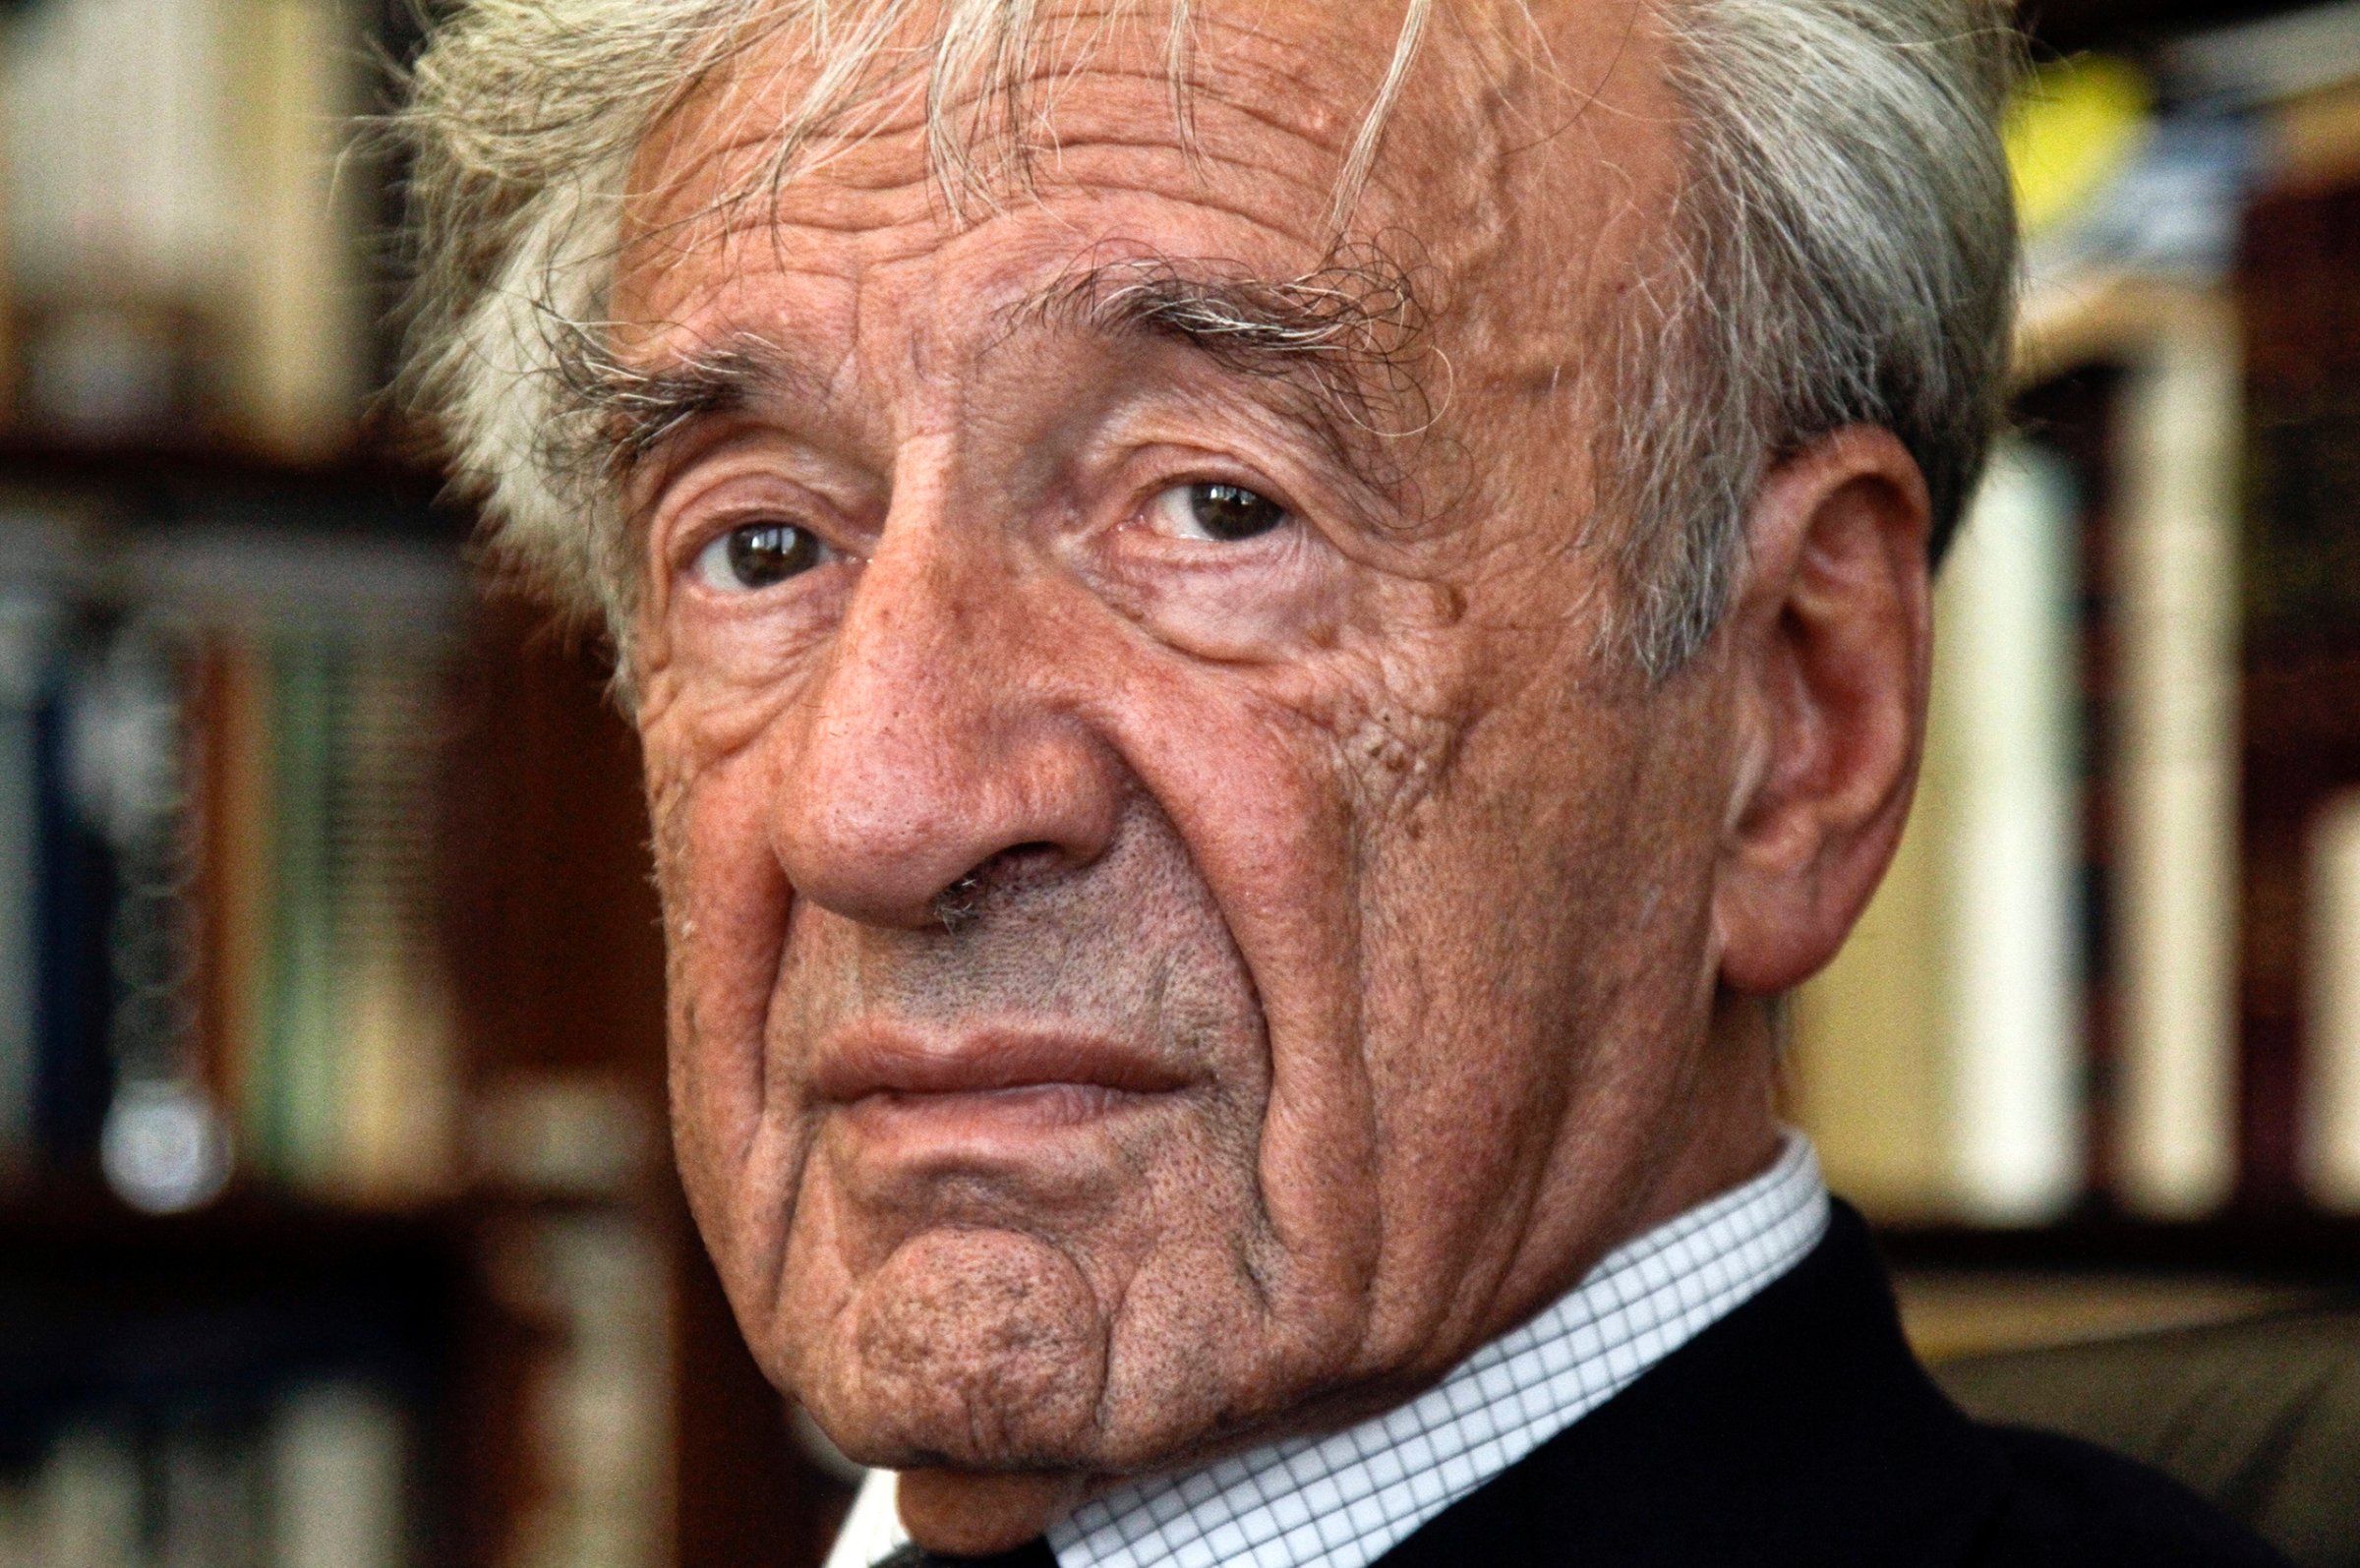 This Sept. 12, 2012, photo shows Holocaust activist and Nobel Peace Prize recipient Elie Wiesel, 83, in his office in New York.